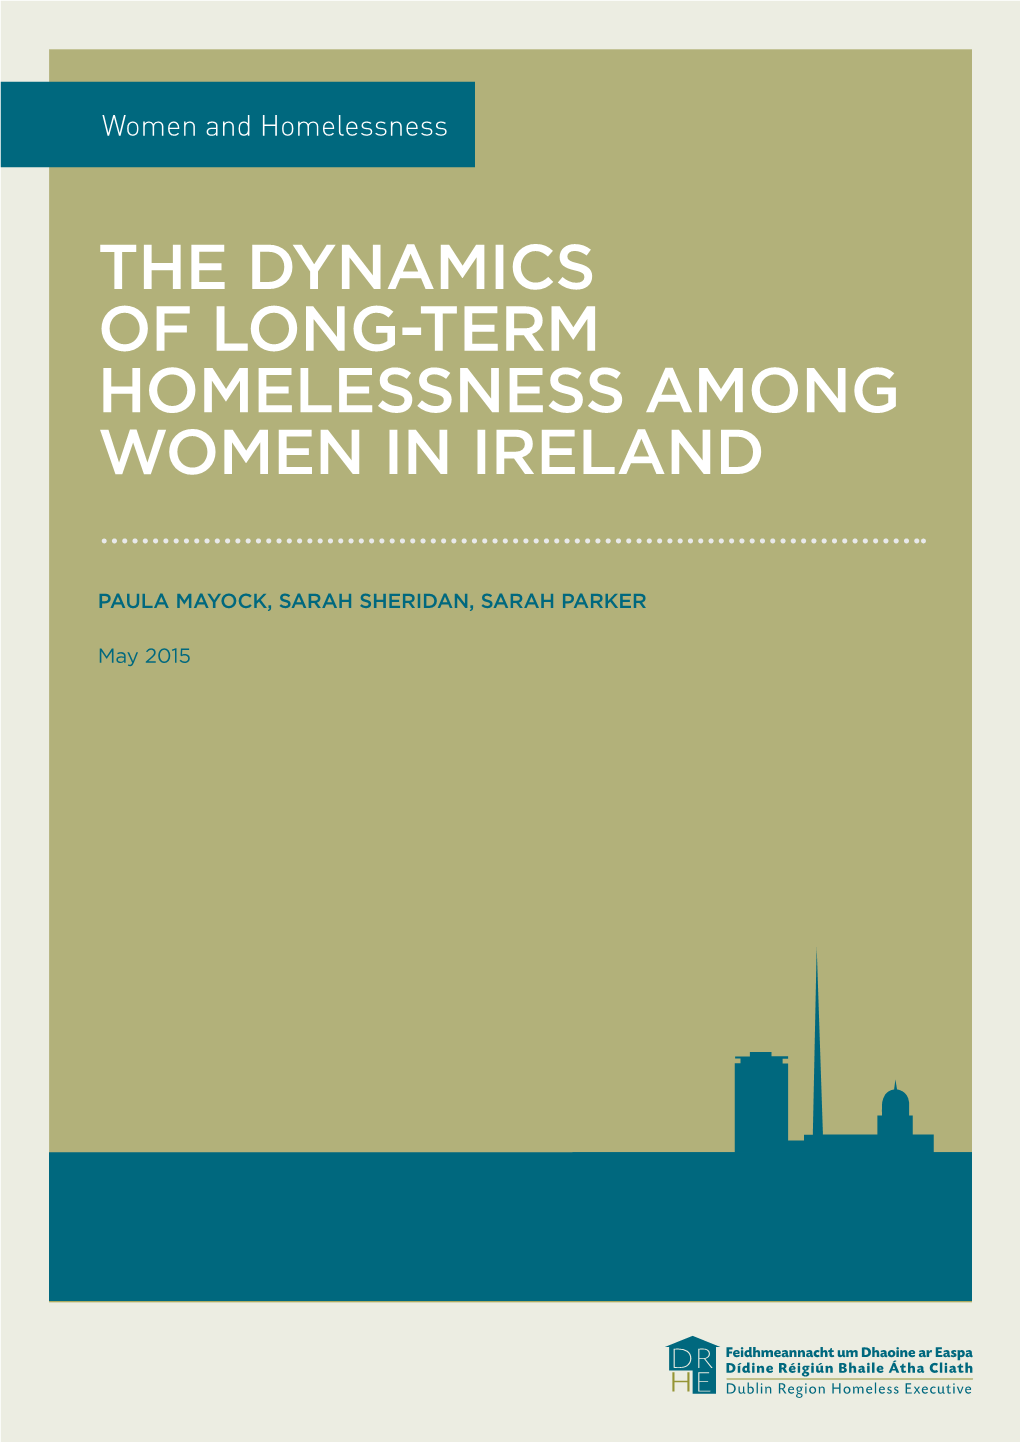 The Dynamics of Long-Term Homelessness Among Women in Ireland